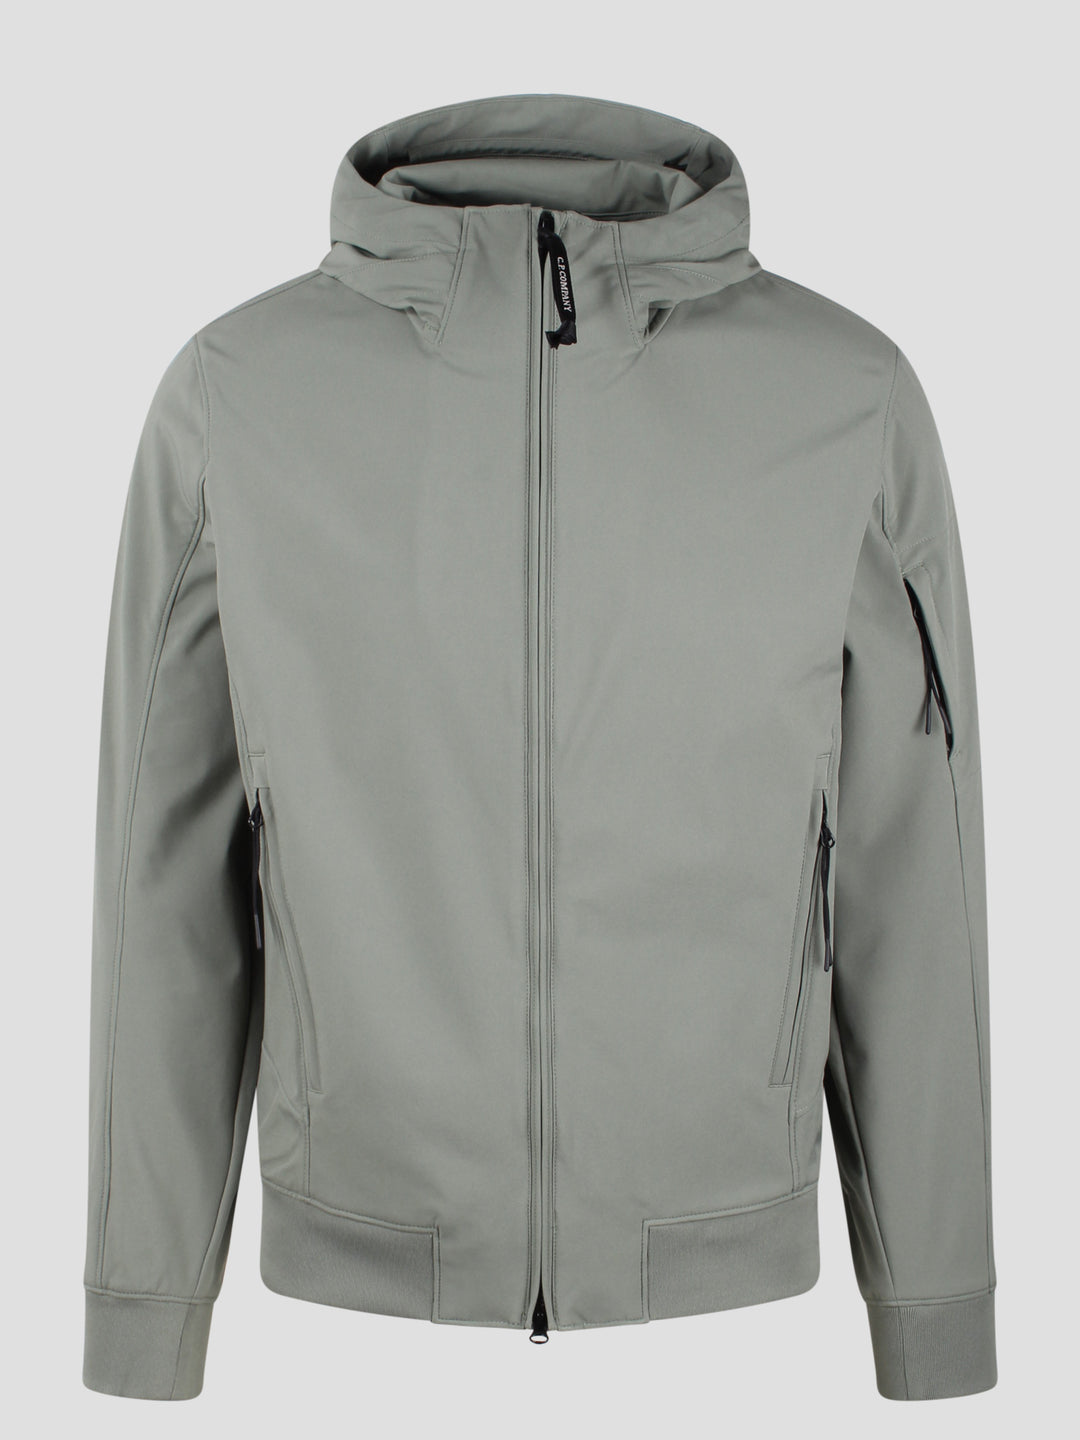 C.p. shell-r hooded jacket